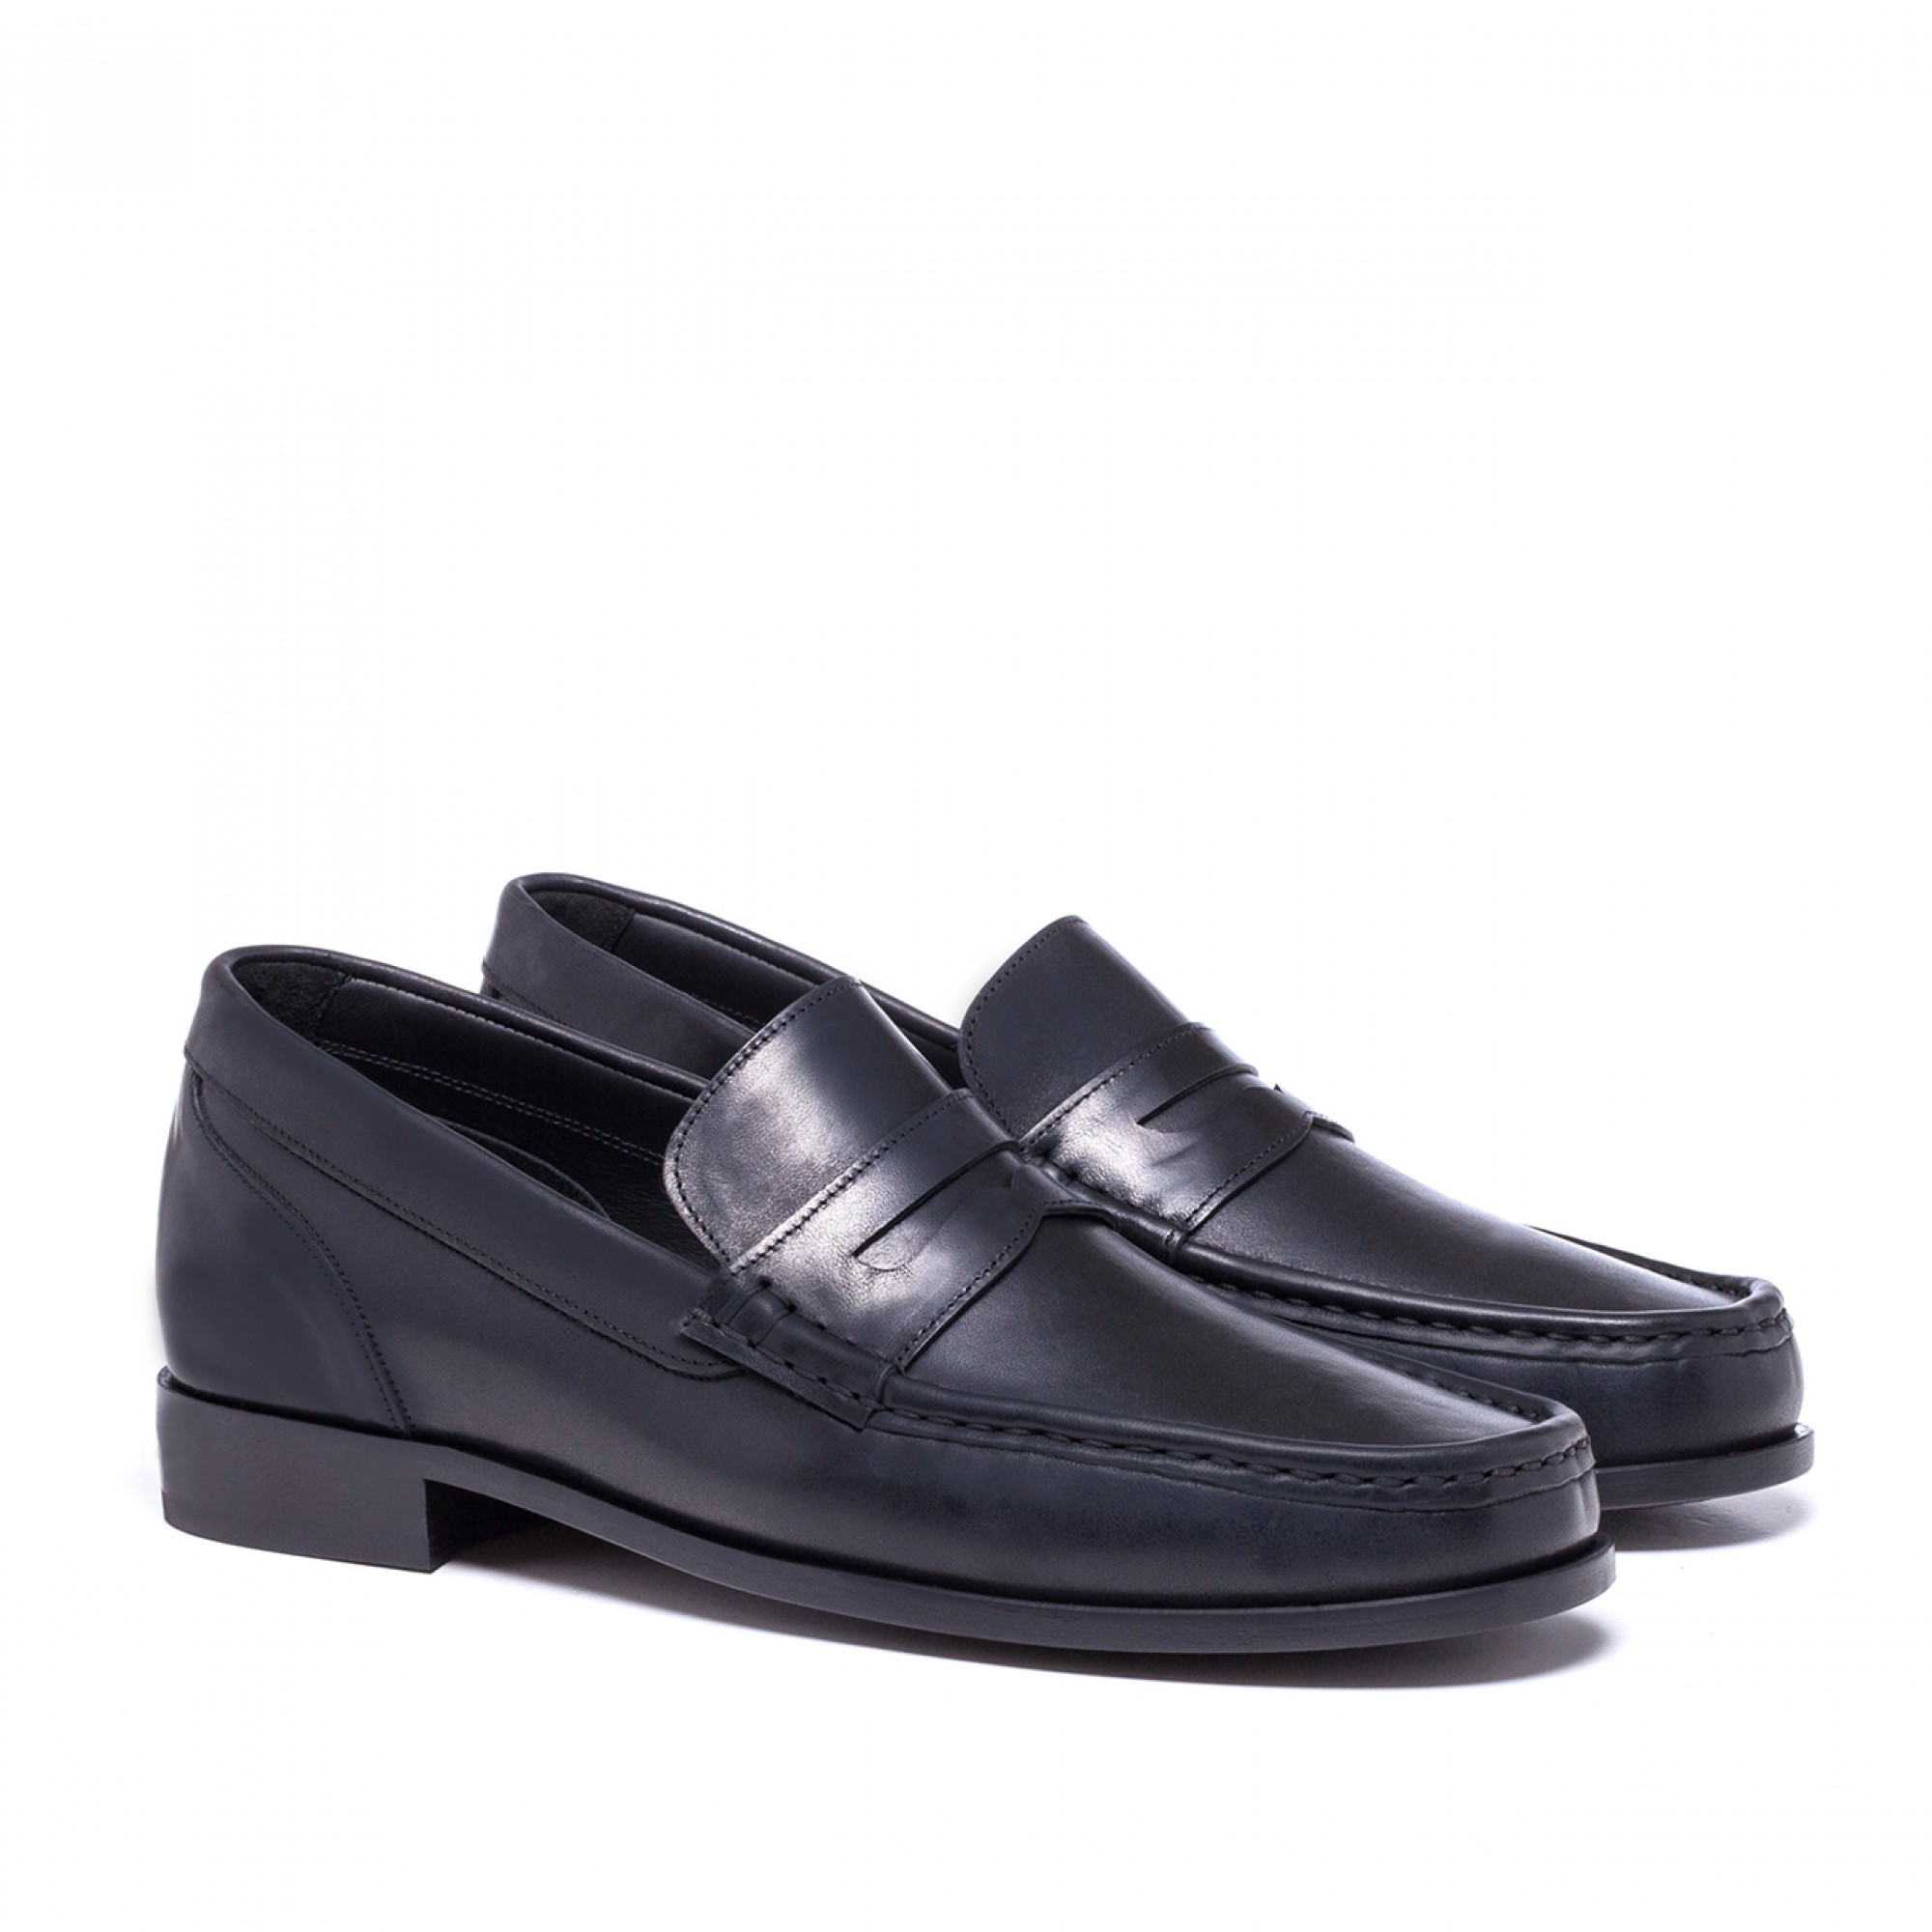 Marocco - Elevator Loafers in Cordovan Leather up to 6 cm